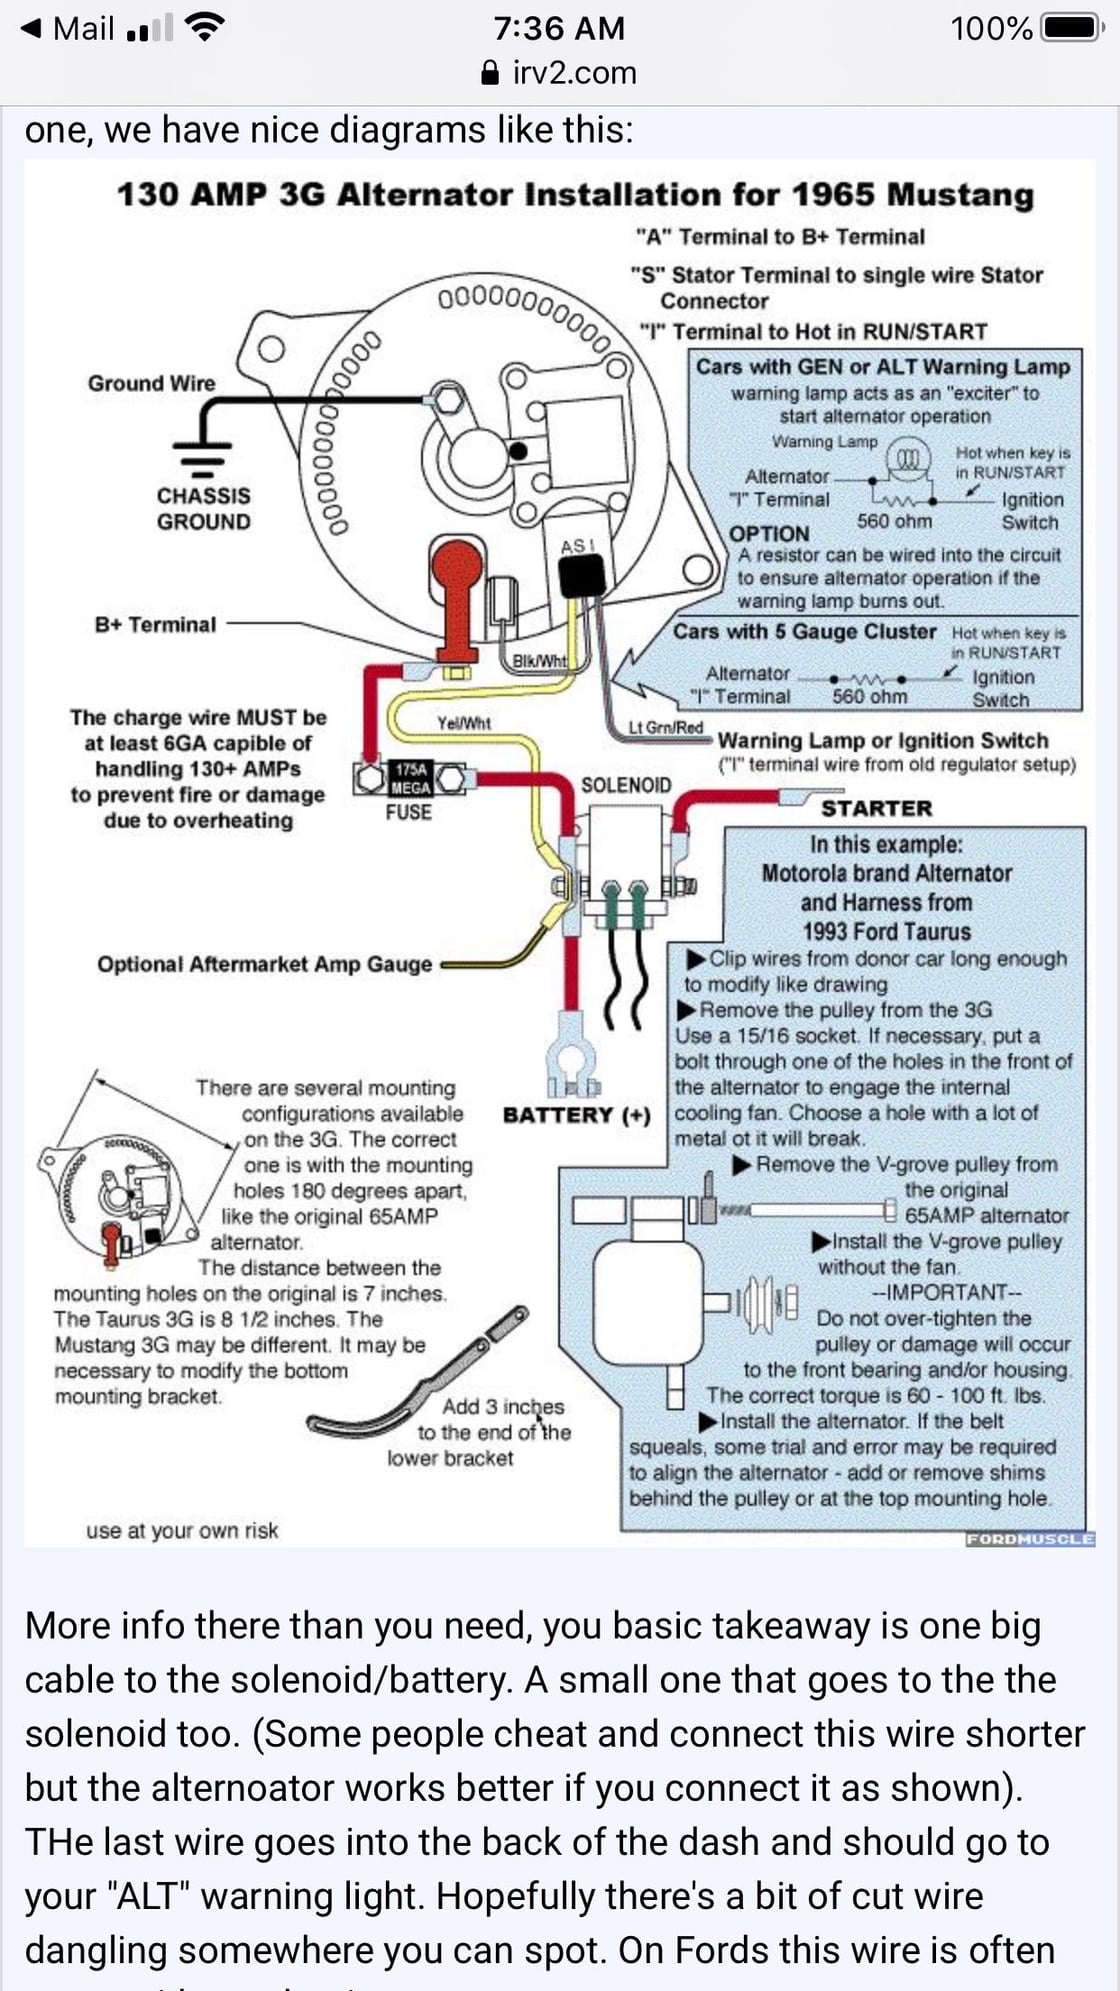 Alternator wiring help please! - Ford Truck Enthusiasts Forums F350 Trailer Wiring Diagram Ford Truck Enthusiasts